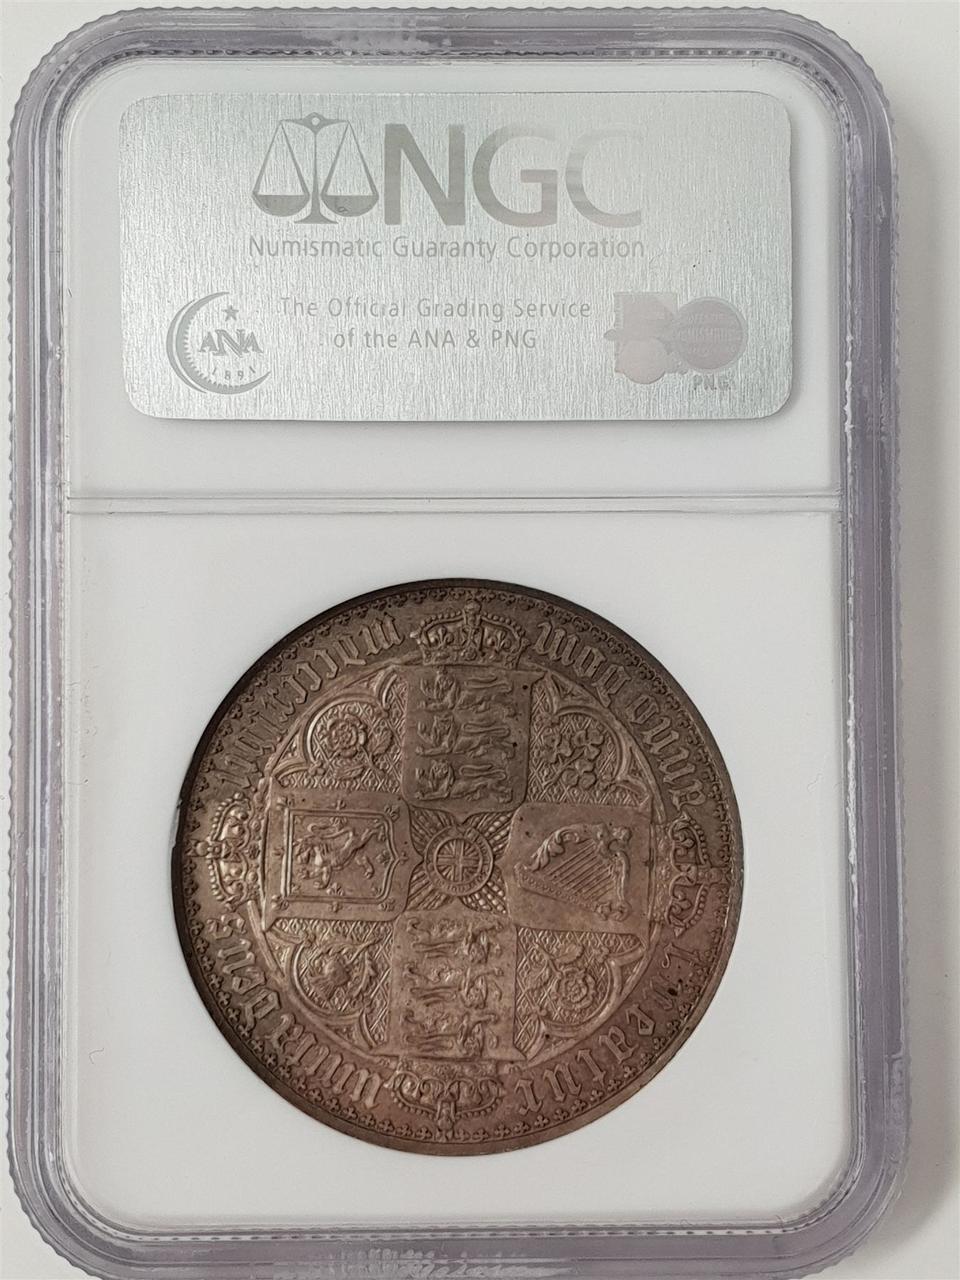 An 1847 Victorian gothic crown, Great Britain, encapsulated by NGC, reverse view of shields design created by William Dyce and engraved by William Wyon